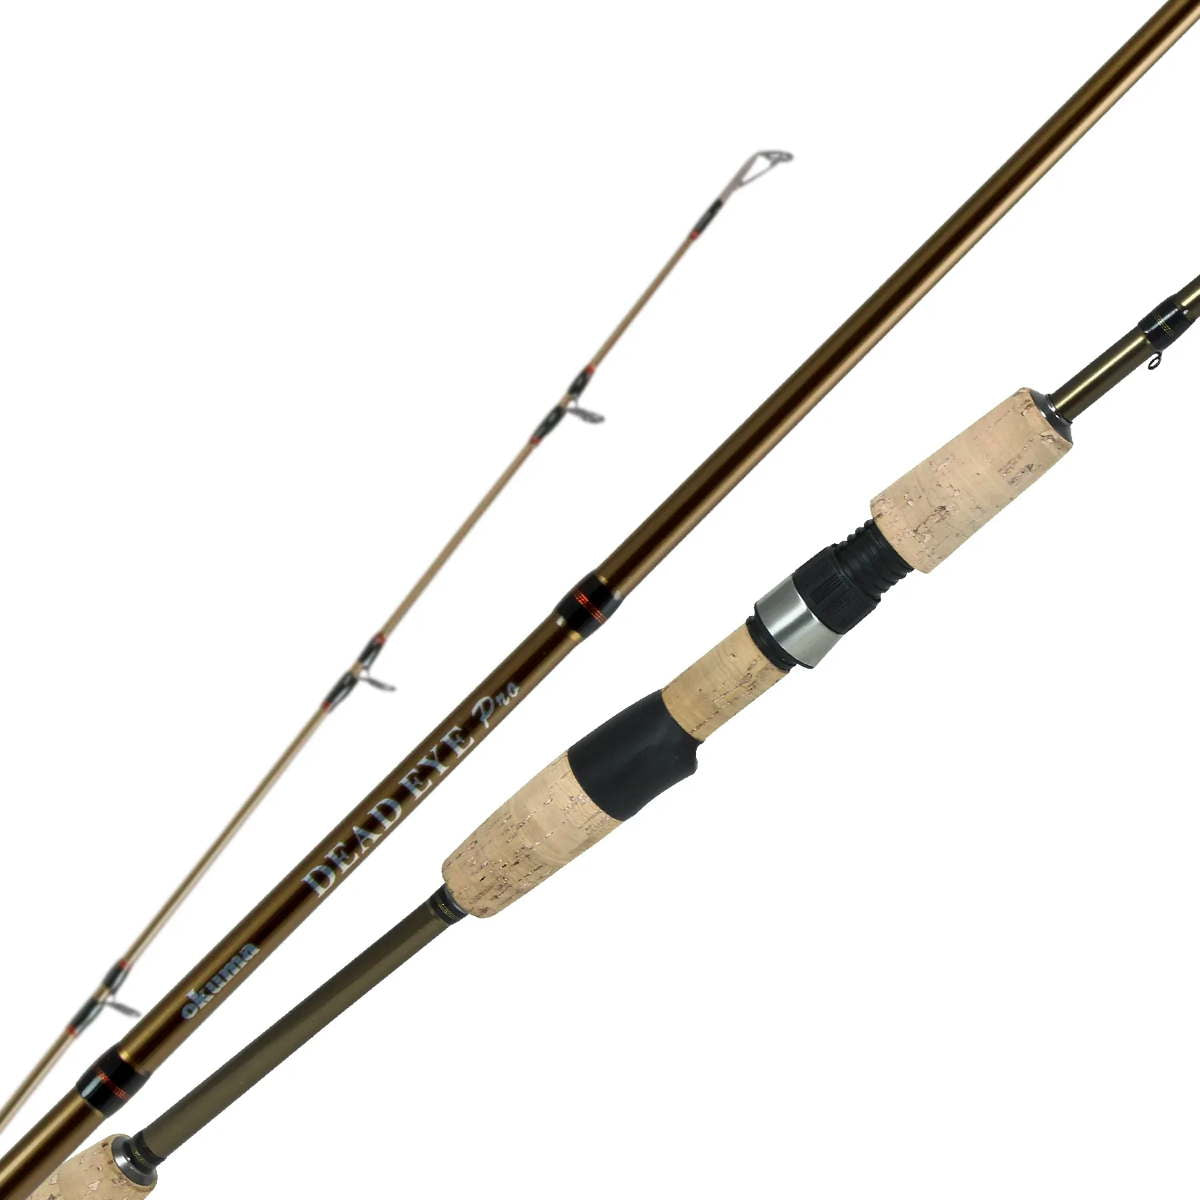 Photo of Okuma Dead Eye Pro Walleye Spinning Rod for sale at United Tackle Shops.